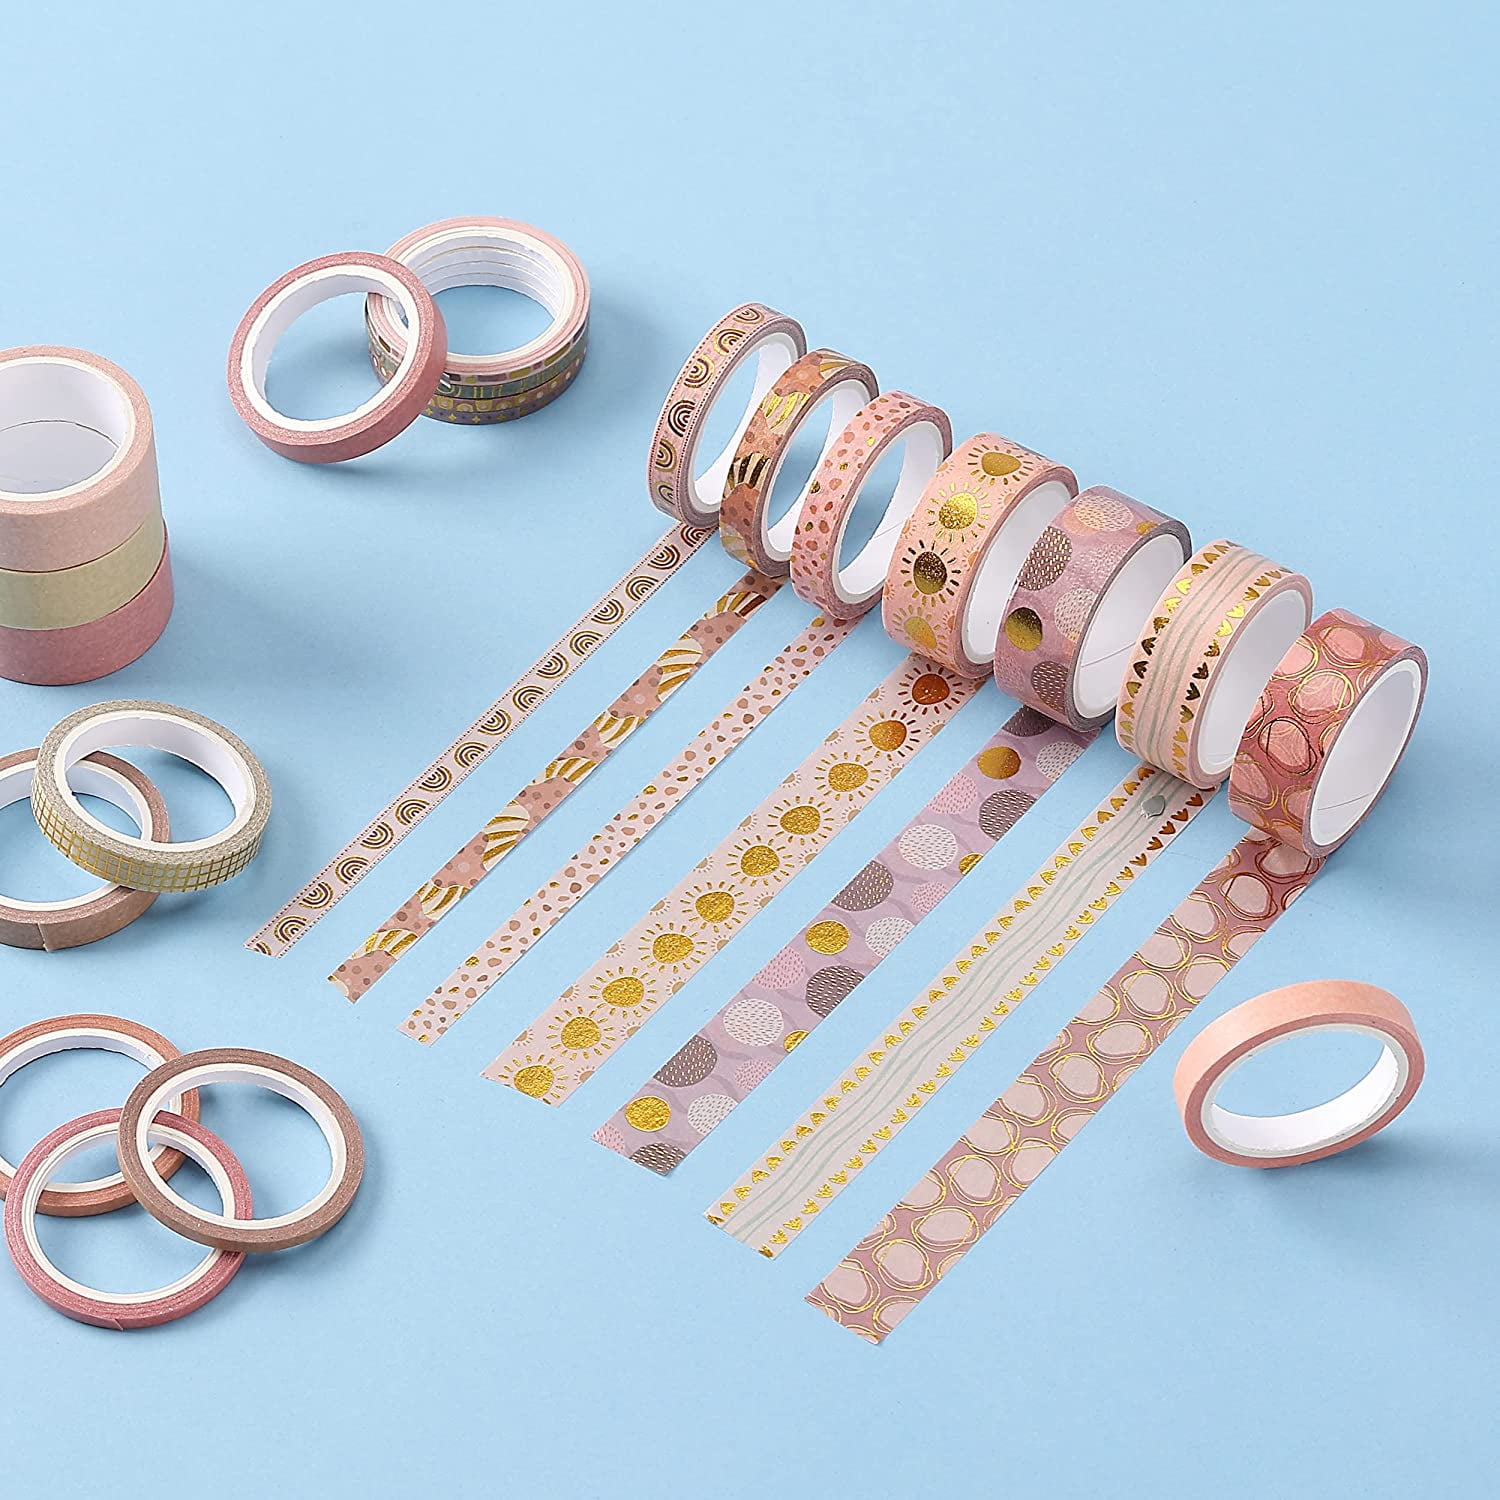 Mr. Pen on Instagram: Bring some boho vibes to your stationery collection  with the Mr. Pen Boho Washi Tape Set! 🌺🌿🌸 This package includes 21 rolls  of washi tape in boho-themed designs